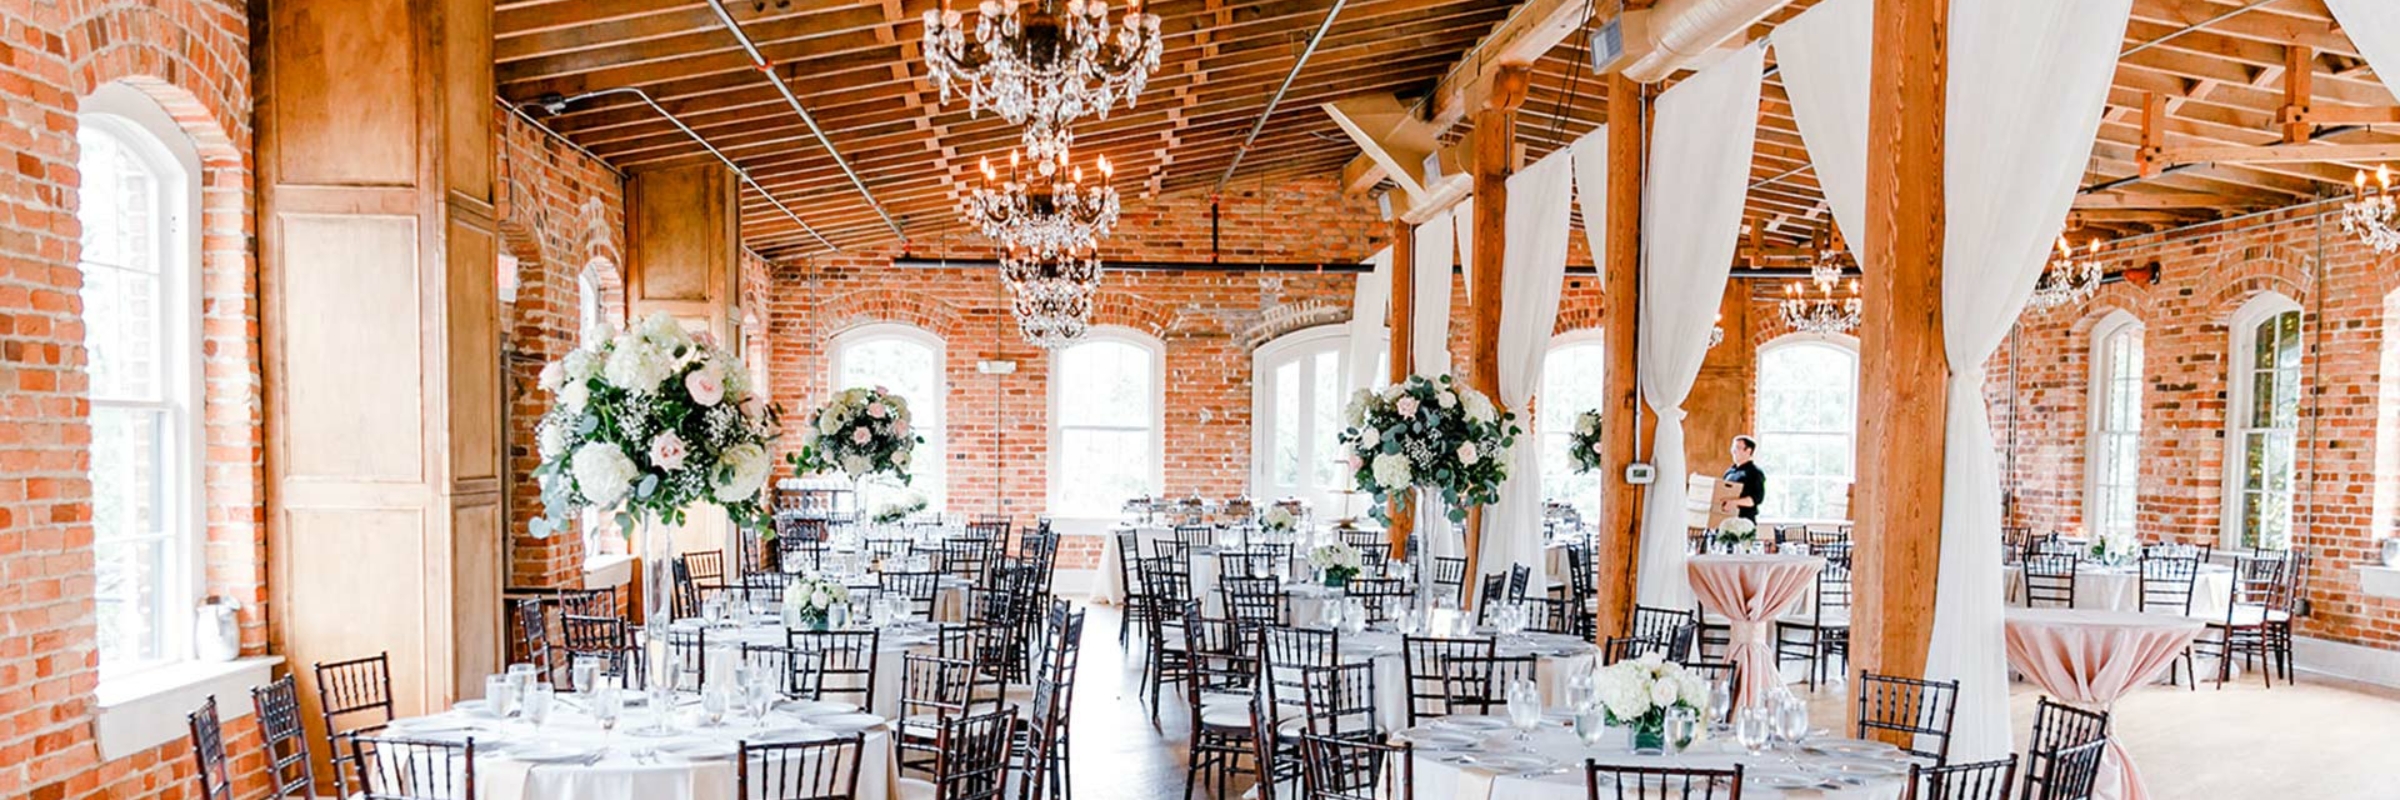 The Perfect Wedding Location in Raleigh